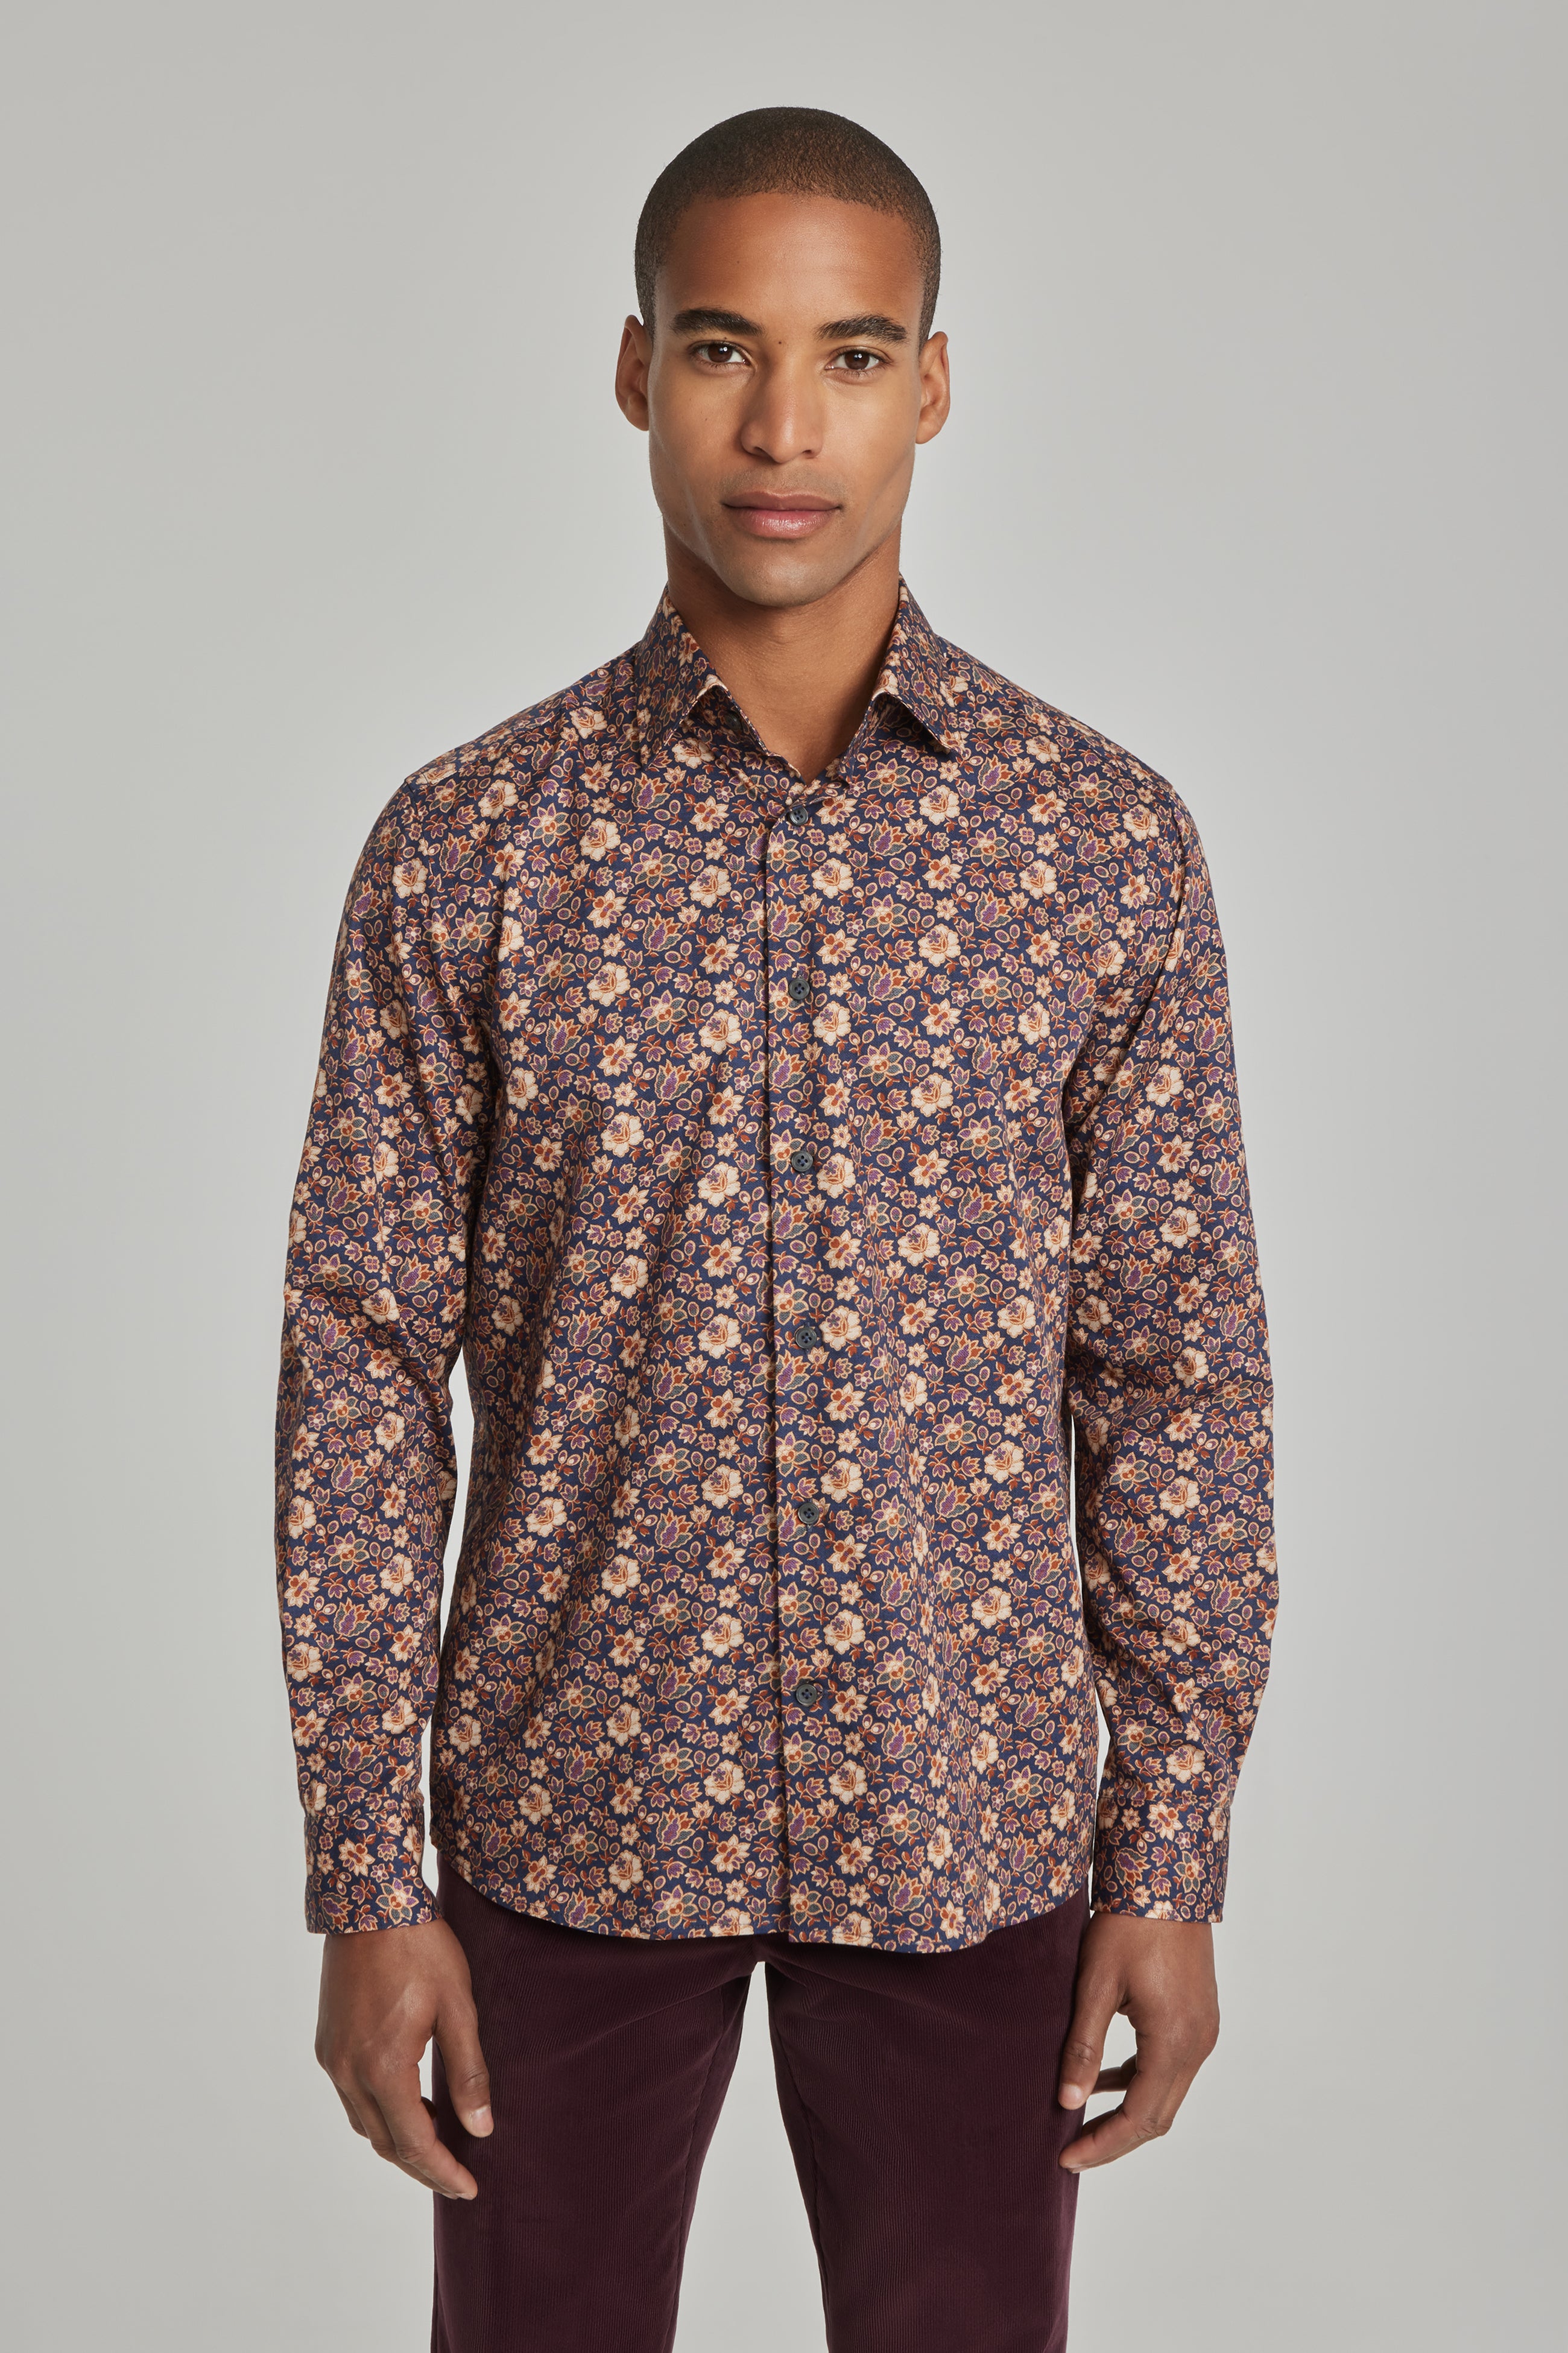 Alt view 2 Floral Print Cotton Shirt in Navy and Burgundy